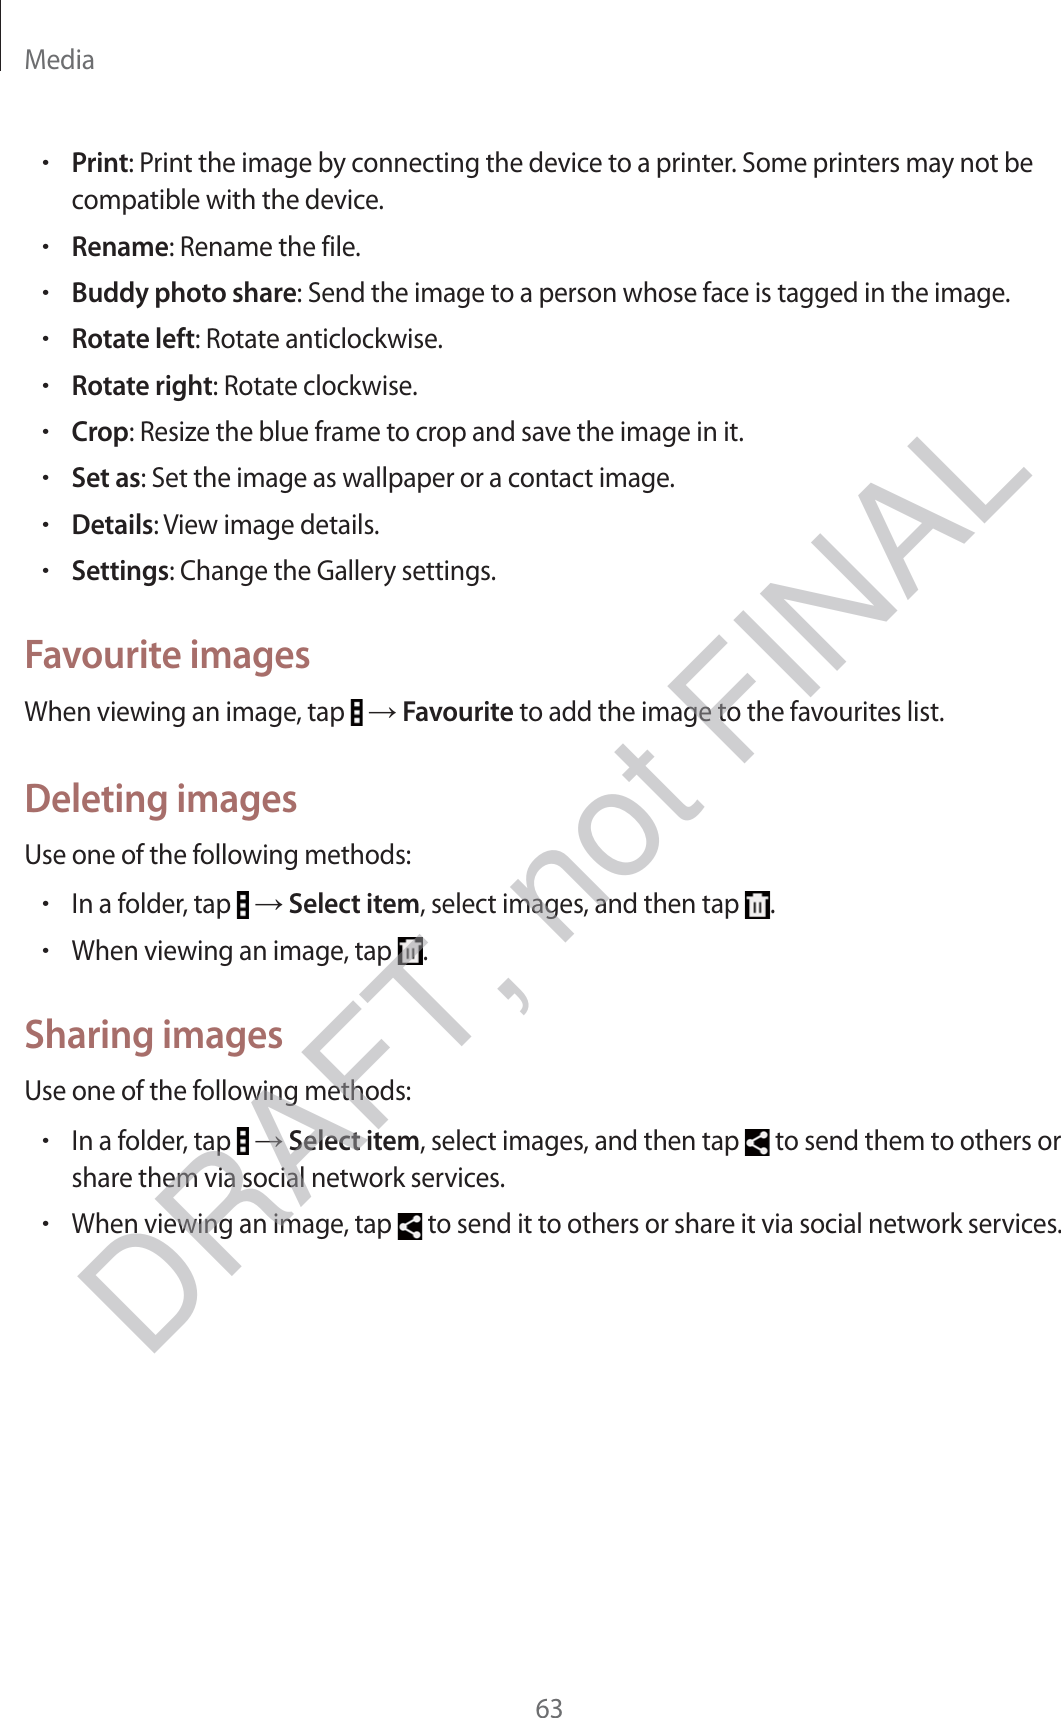 Media63rPrint: Print the image by connecting the device to a printer. Some printers may not be compatible with the device.rRename: Rename the file.rBuddy photo share: Send the image to a person whose face is tagged in the image.rRotate left: Rotate anticlockwise.rRotate right: Rotate clockwise.rCrop: Resize the blue frame to crop and save the image in it.rSet as: Set the image as wallpaper or a contact image.rDetails: View image details.rSettings: Change the Gallery settings.Favourite imagesWhen viewing an image, tap   → Favourite to add the image to the favourites list.Deleting imagesUse one of the following methods:rIn a folder, tap   → Select item, select images, and then tap  .rWhen viewing an image, tap  .Sharing imagesUse one of the following methods:rIn a folder, tap   → Select item, select images, and then tap   to send them to others or share them via social network services.rWhen viewing an image, tap   to send it to others or share it via social network services.DRAFT, not FINAL